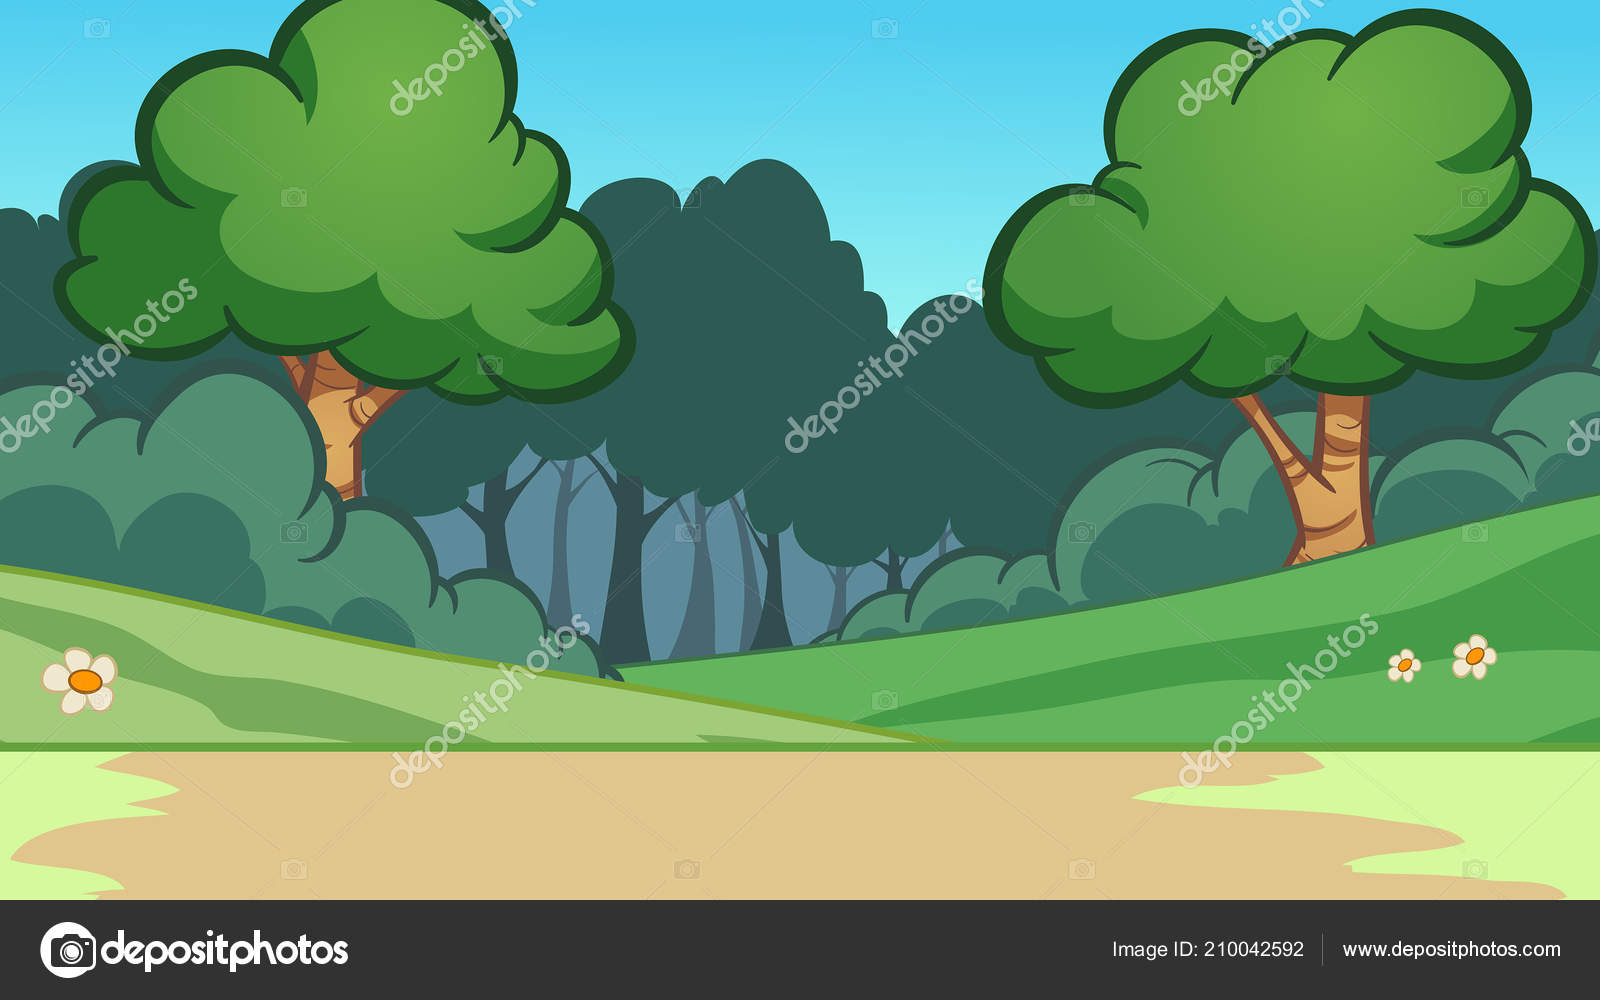 110,745 Forest background cartoon Vector Images | Depositphotos